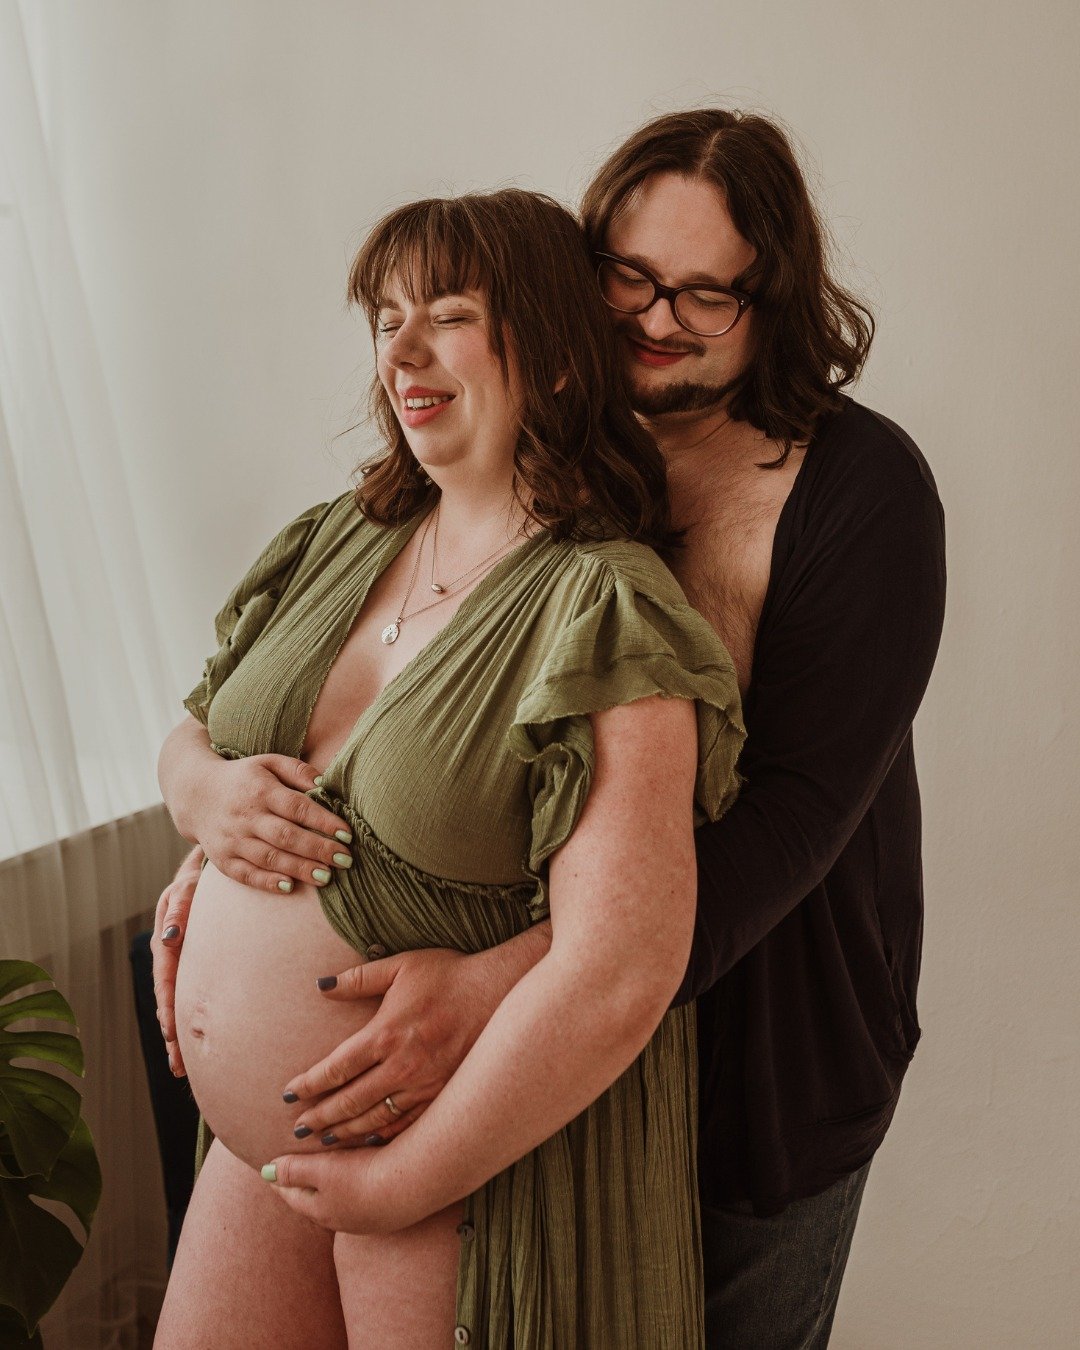 A maternity photoshoot is a wonderful way to remember this special time in your life❤

But it is so much more than that! 

It celebrates your own unique story. It allows the both of you to pause and take a second for all the excitement to land. 

It'